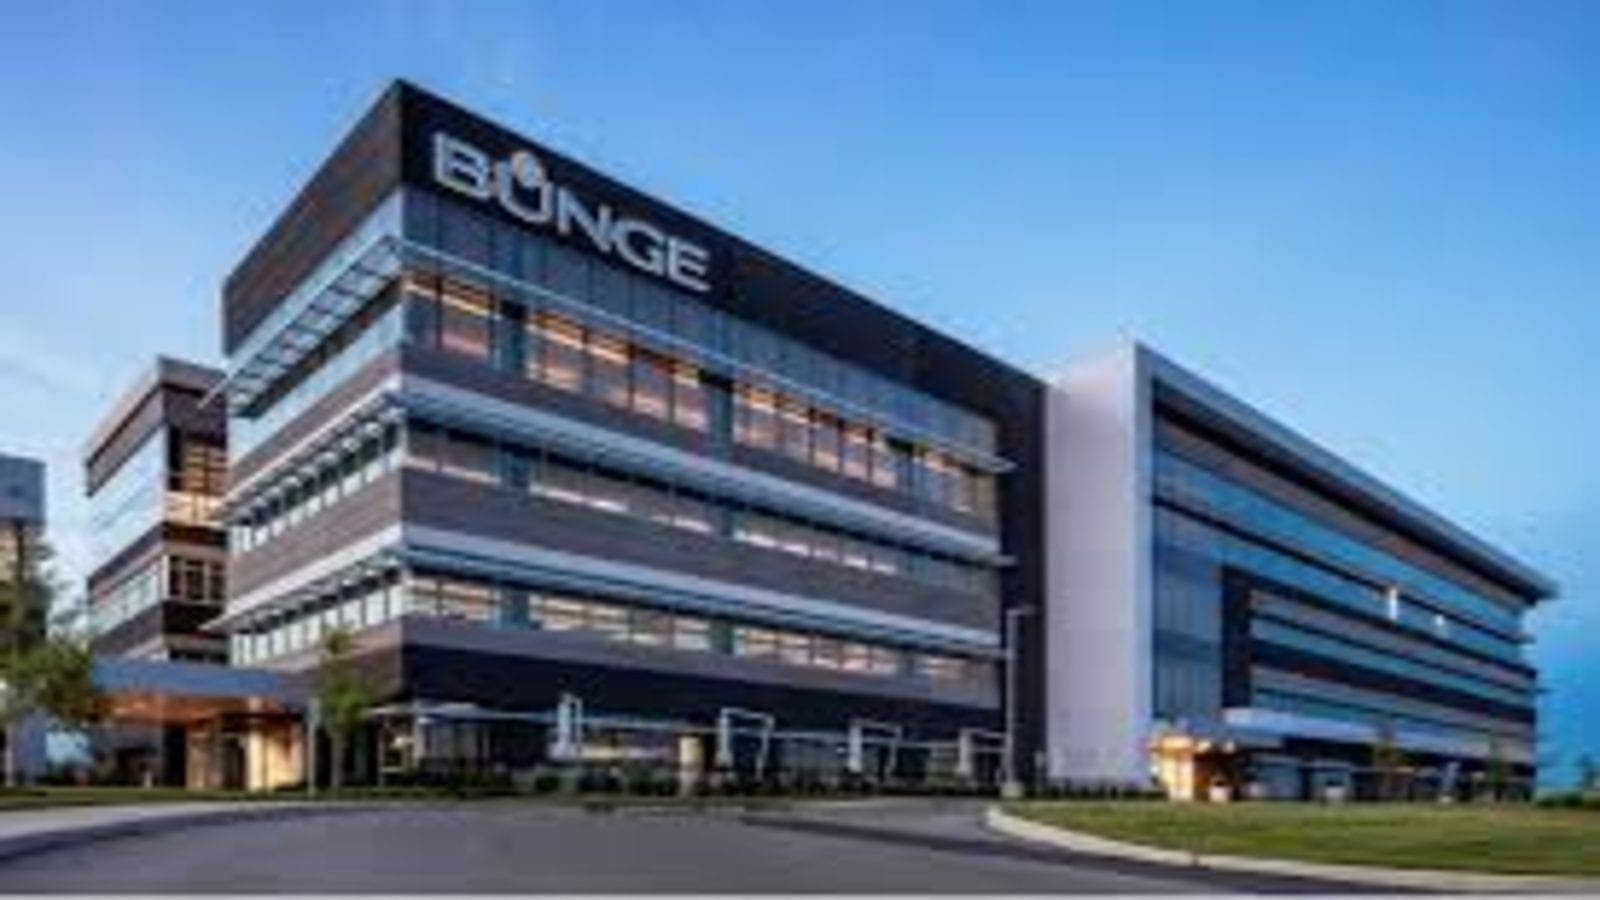 Bunge attributes impressive full year performance to 3-year-old transformation strategy